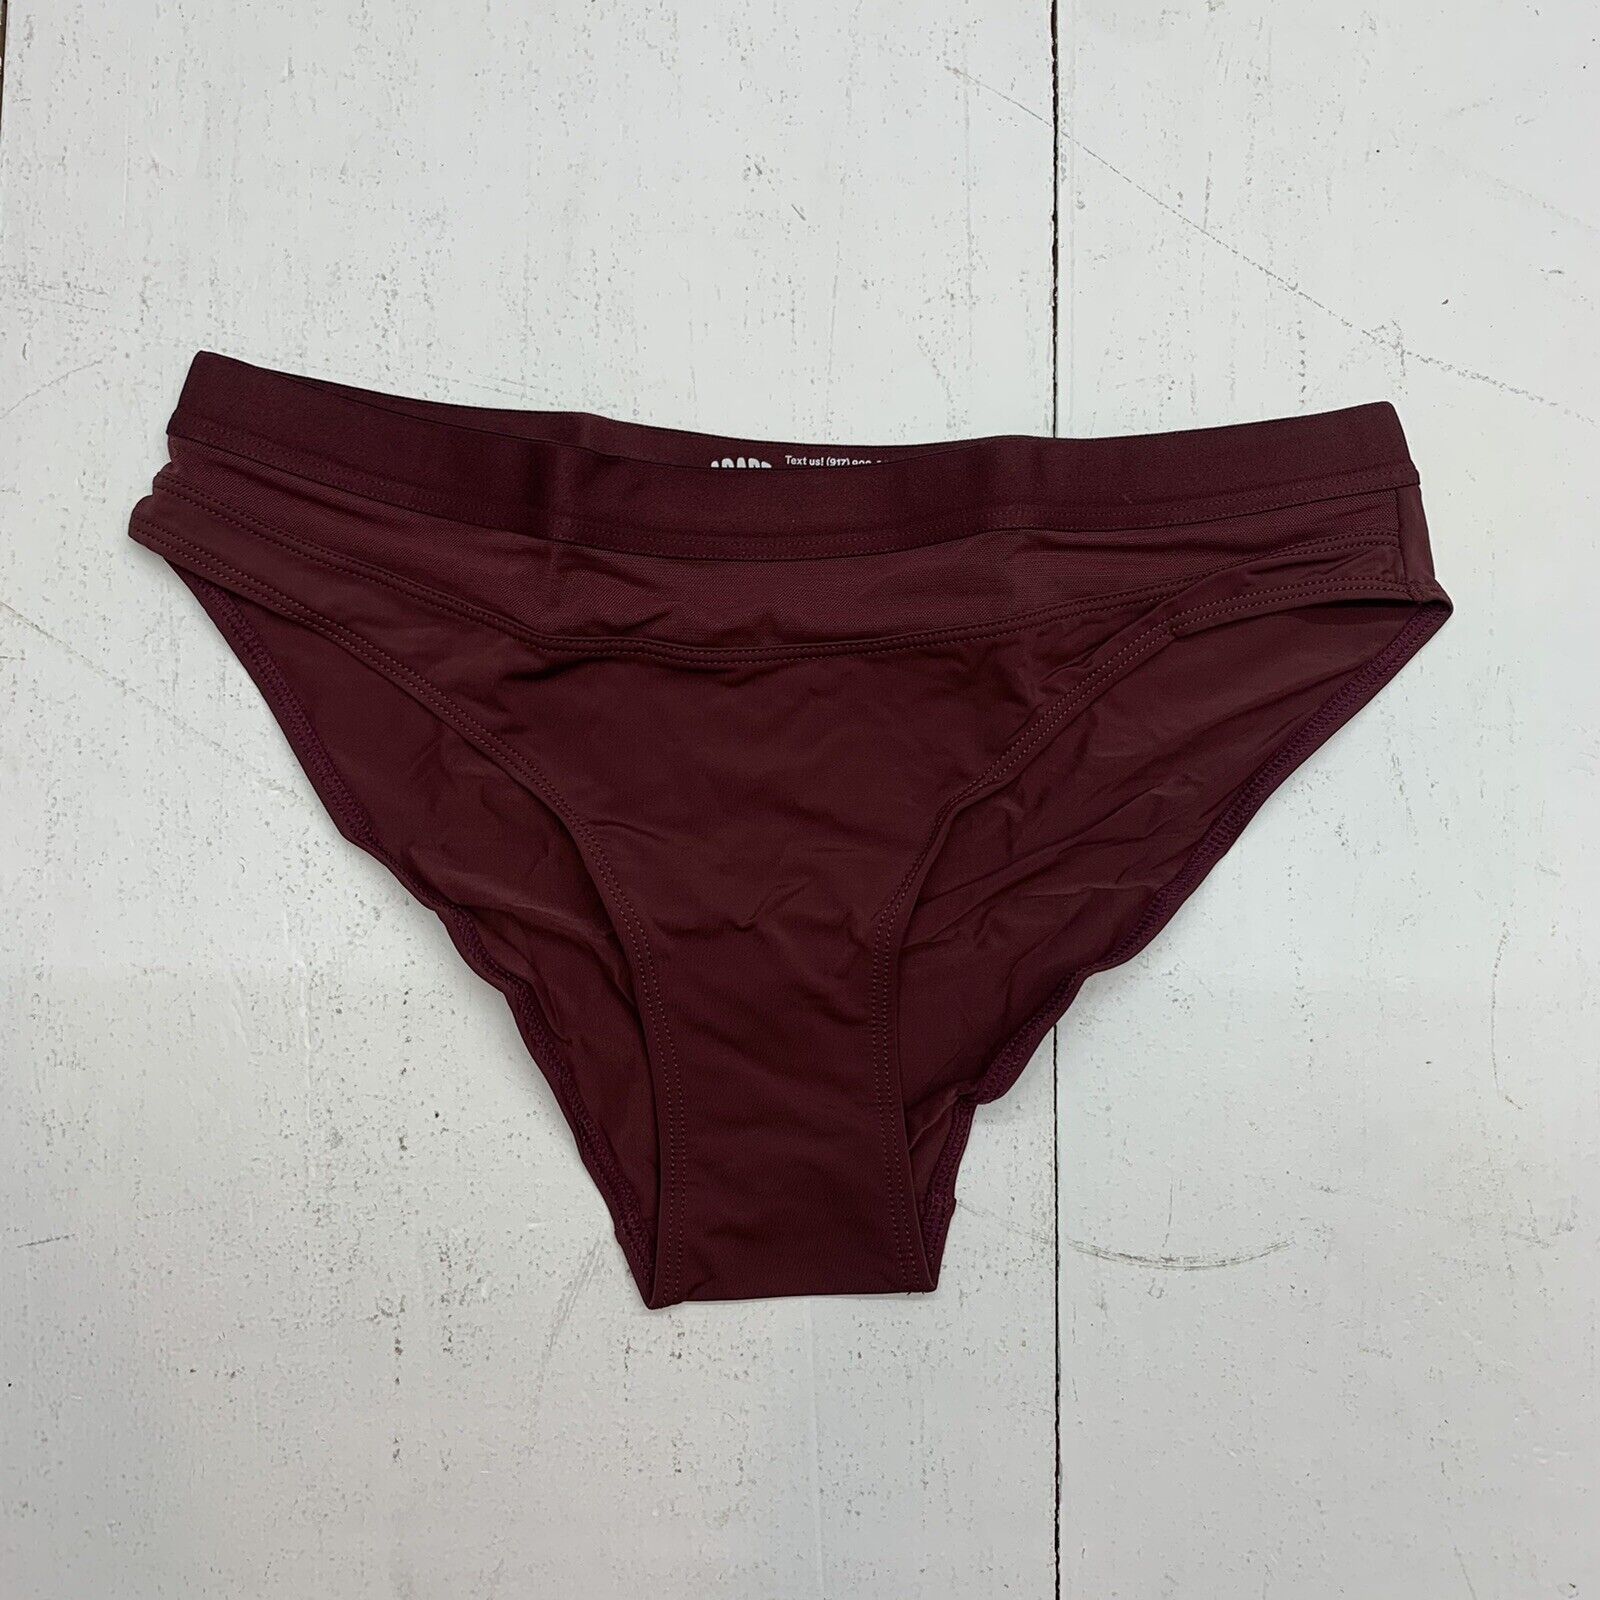 Parade Panties Womens Maroon Briefs size Small - beyond exchange